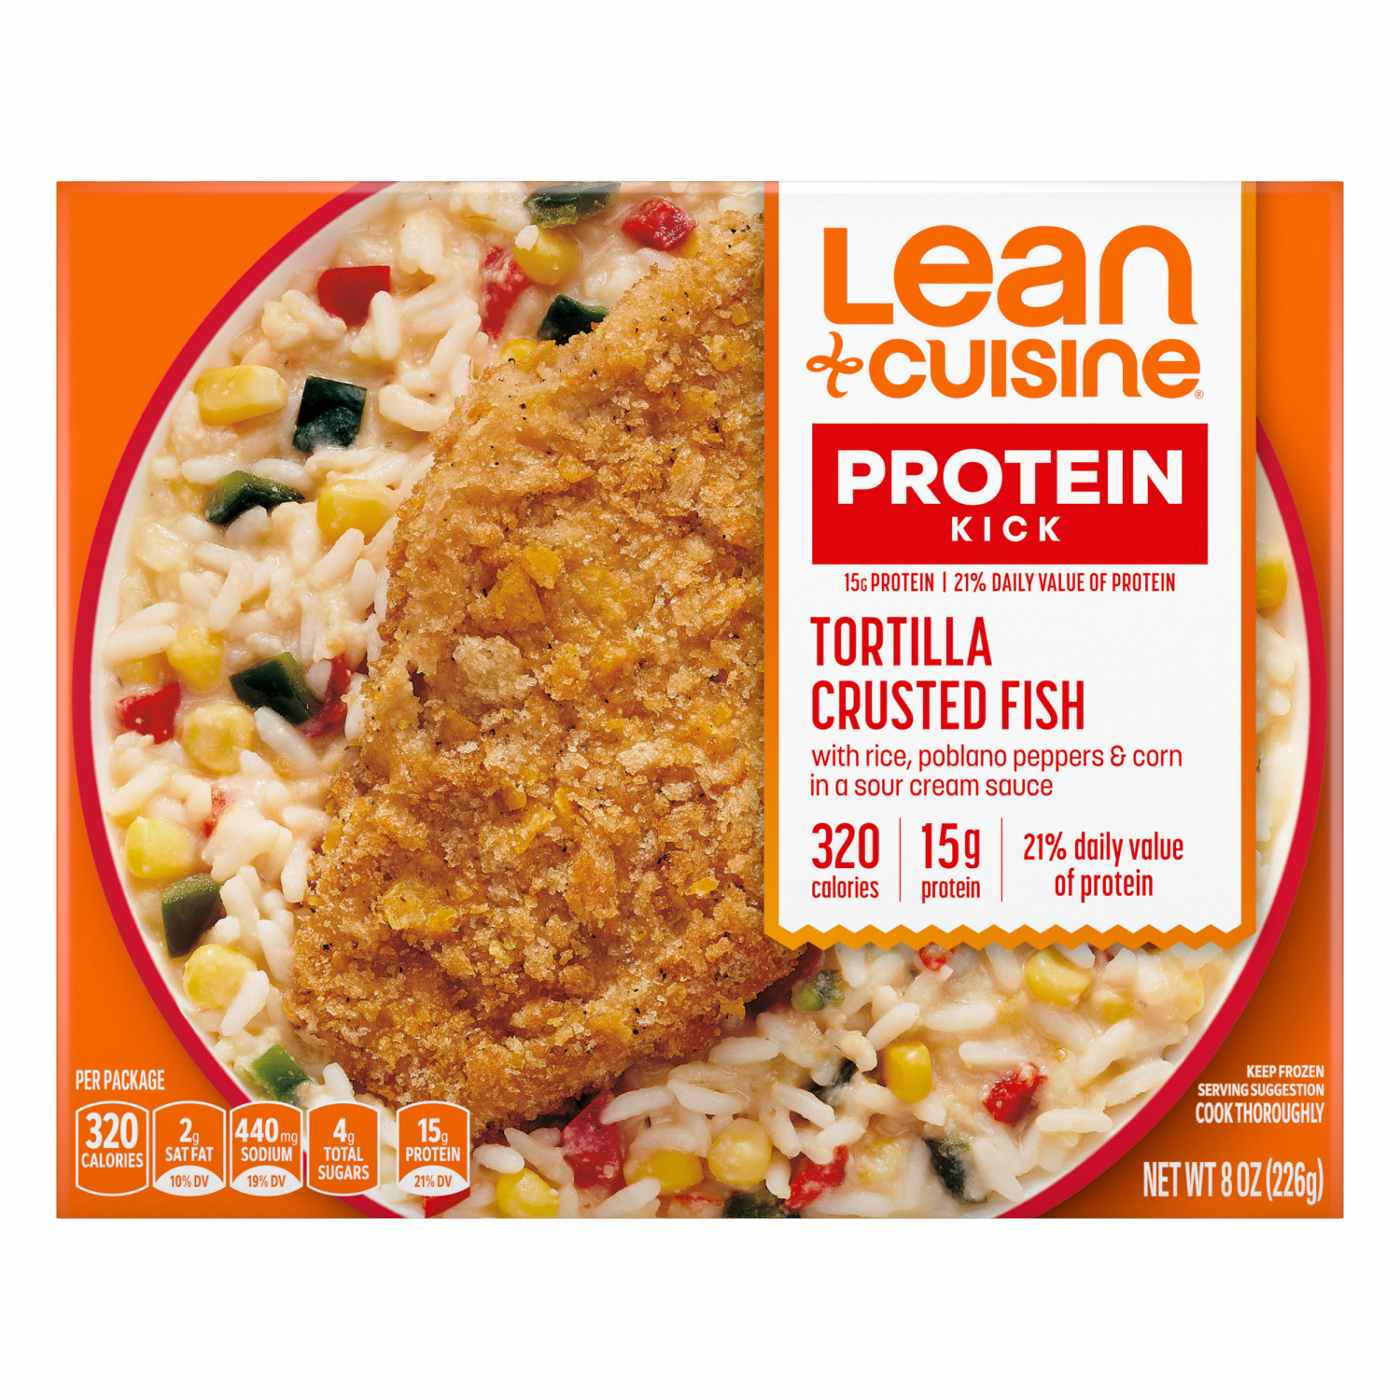 Lean Cuisine 15g Protein Tortilla Crusted Fish Frozen Meal; image 1 of 8